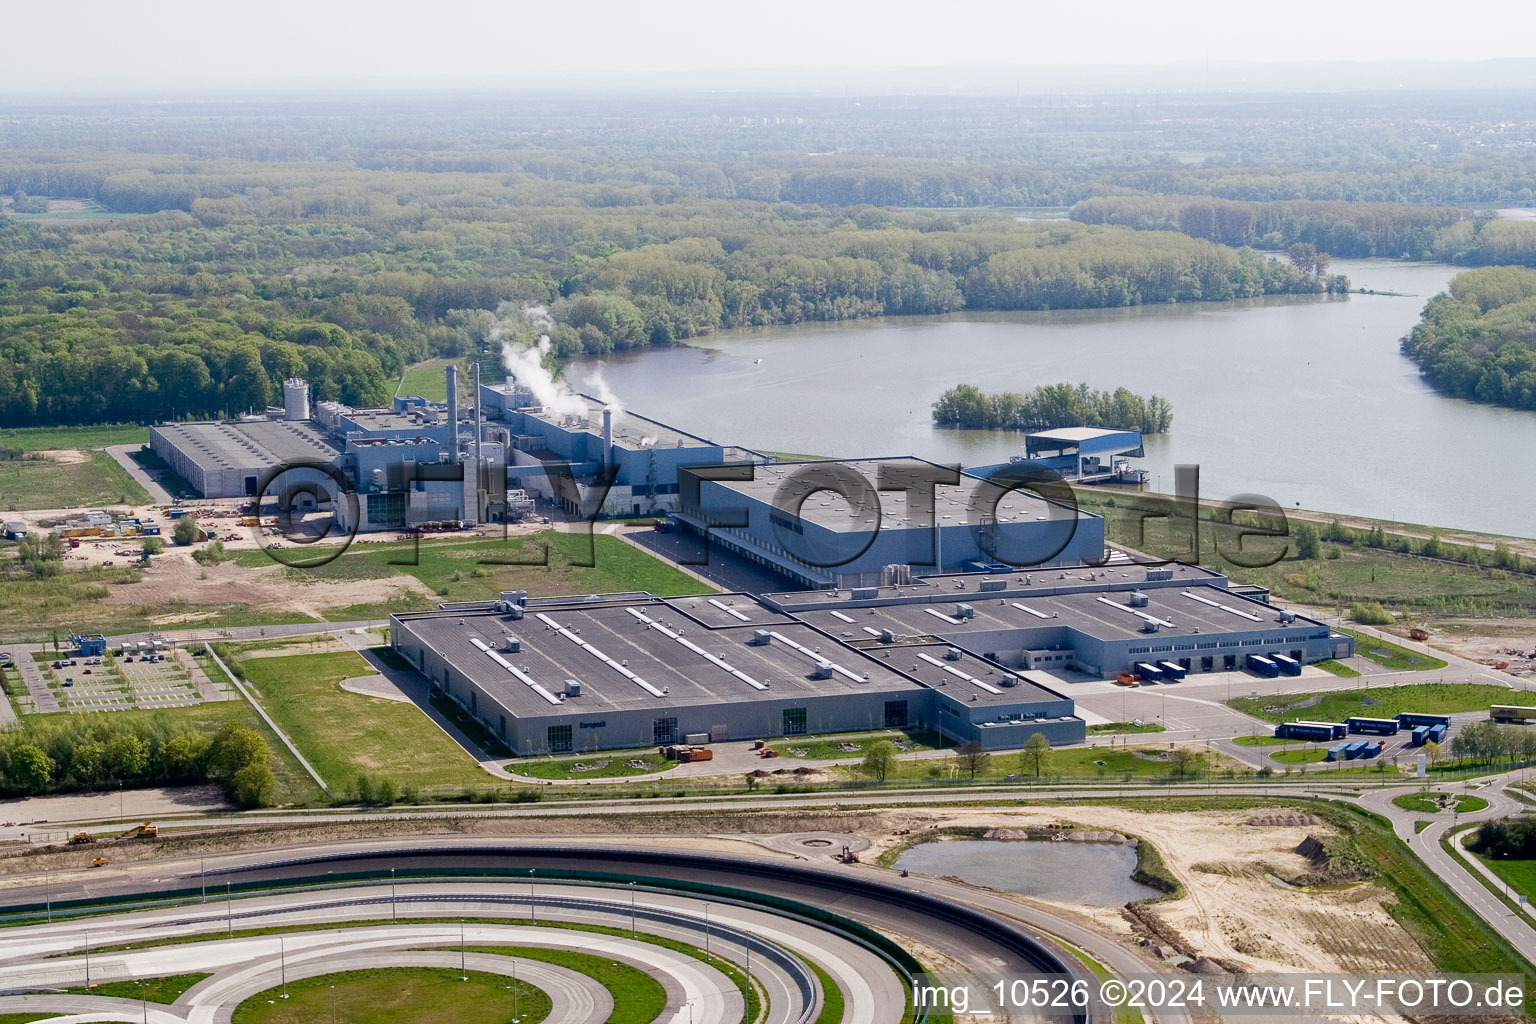 Oberwald industrial area, Palm paper factory in Wörth am Rhein in the state Rhineland-Palatinate, Germany from above